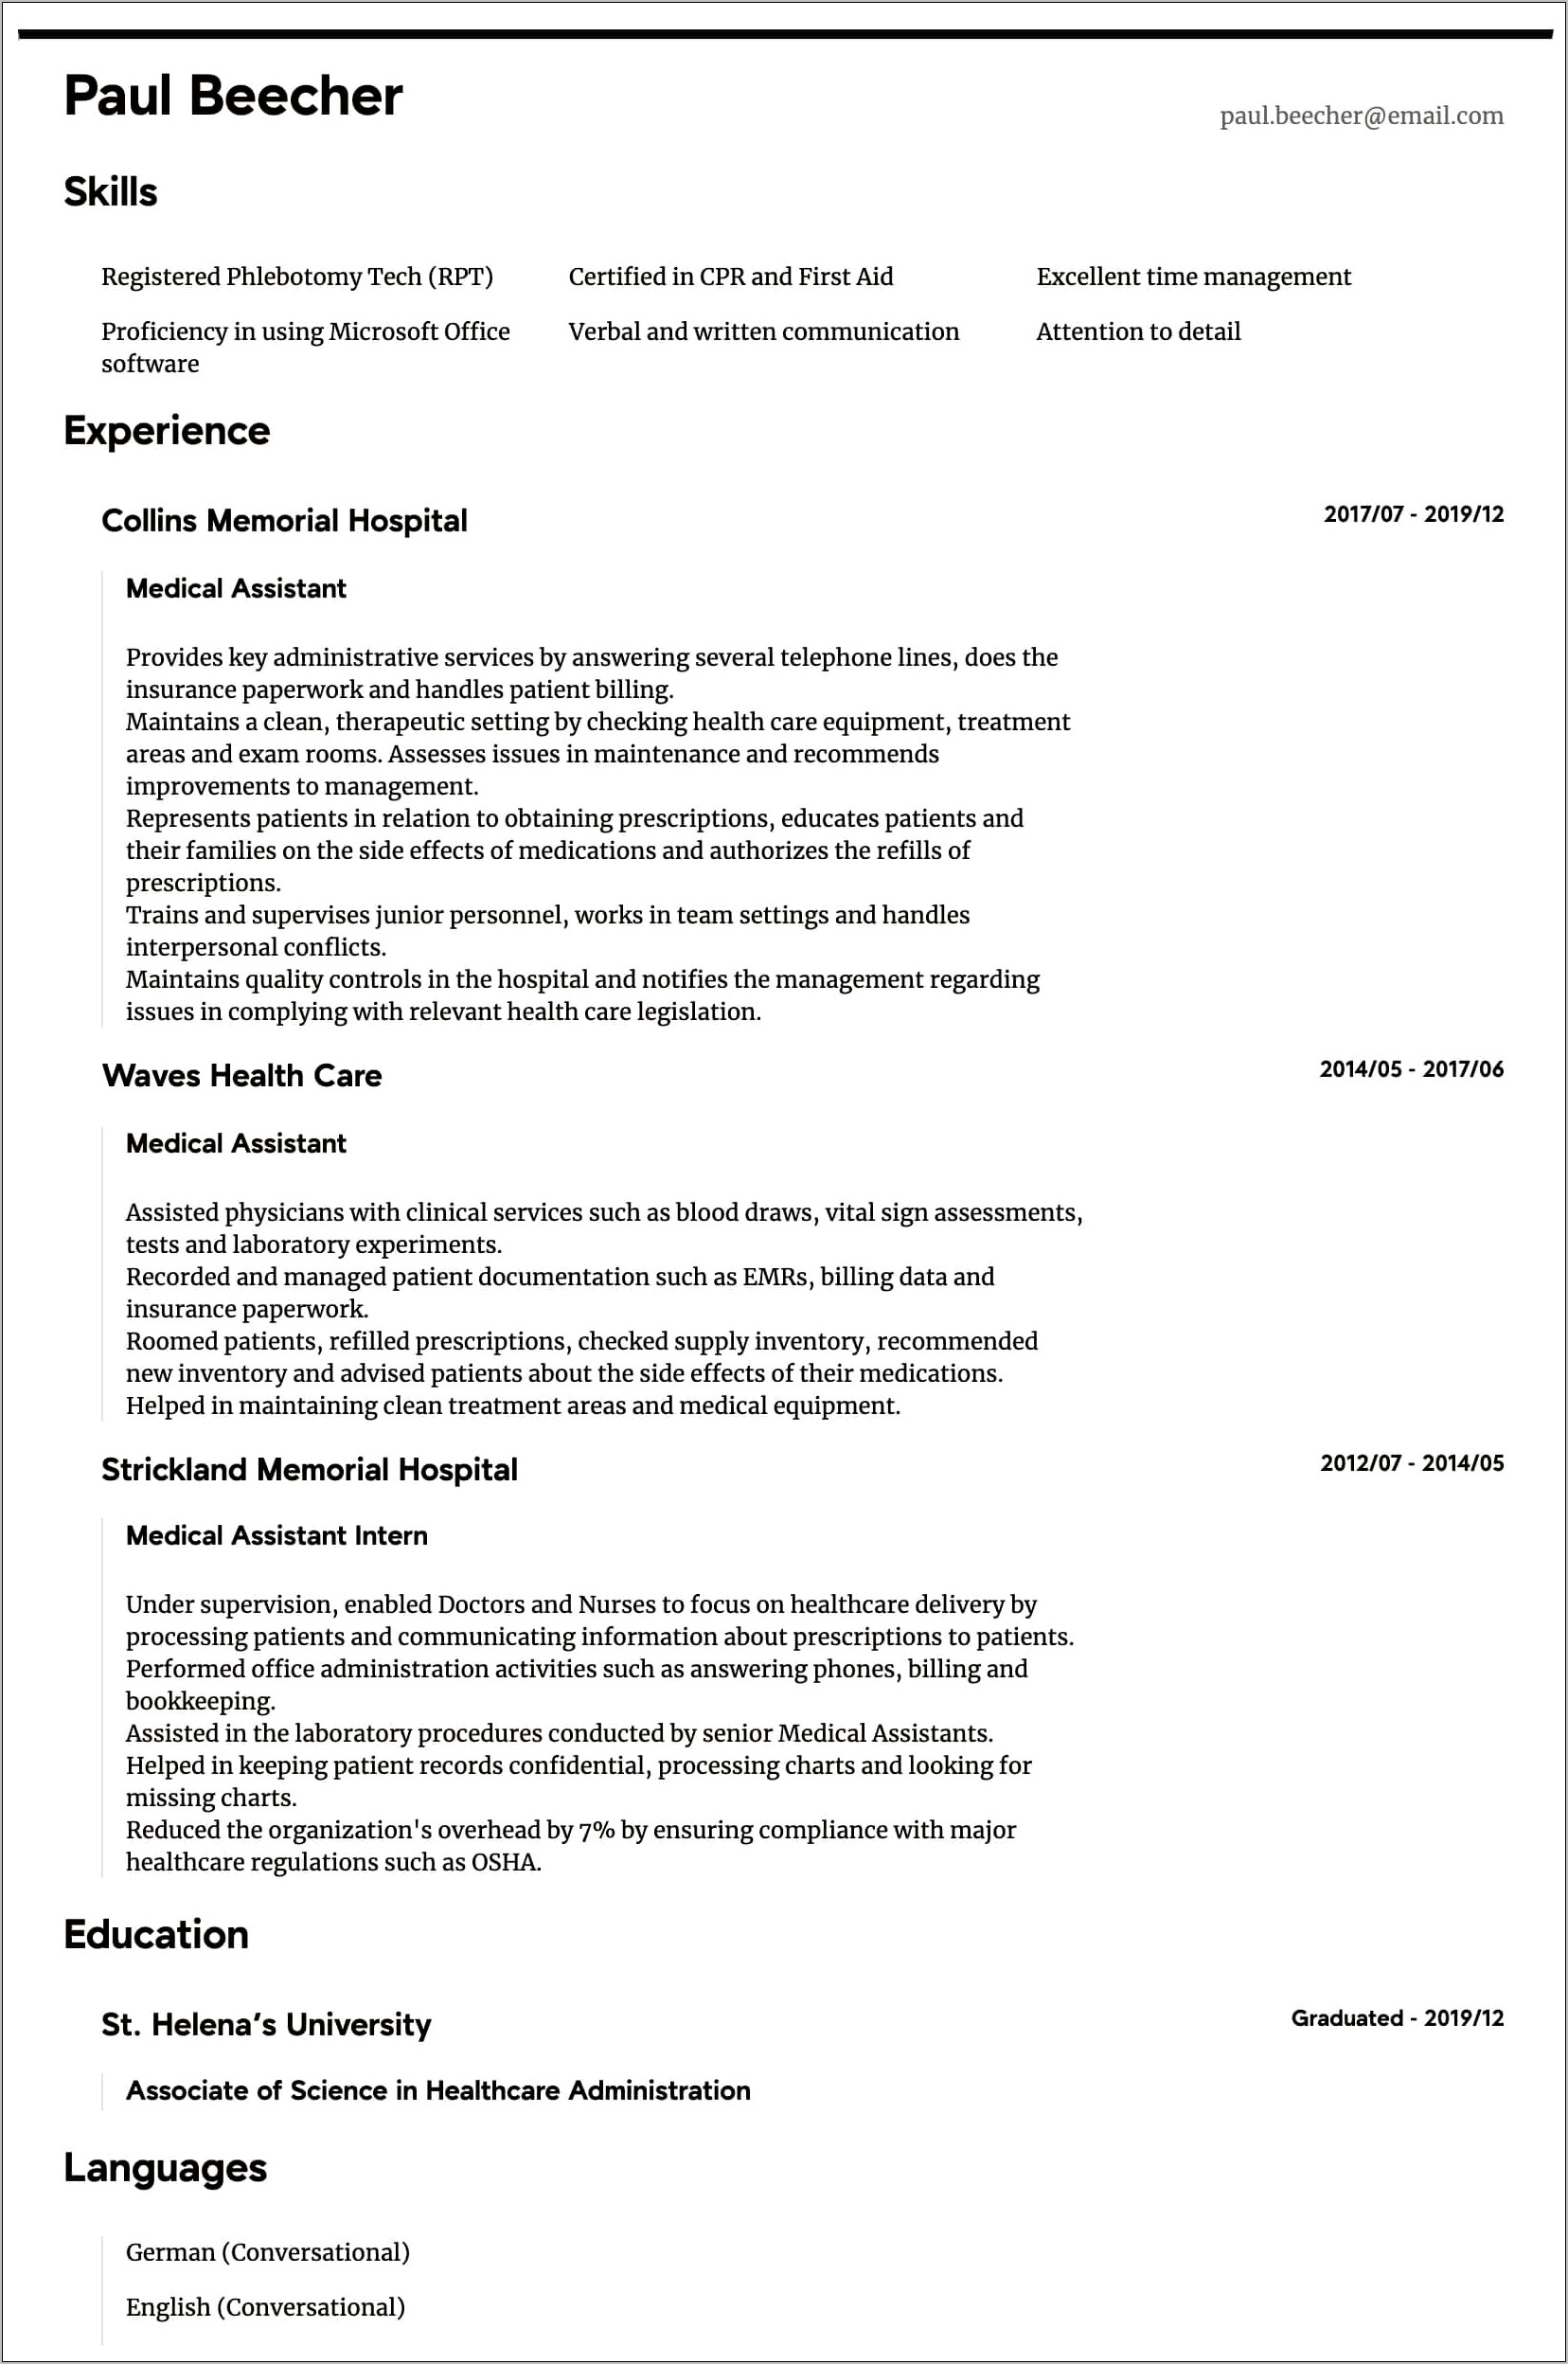 Resume Objectives For Medical Jobs